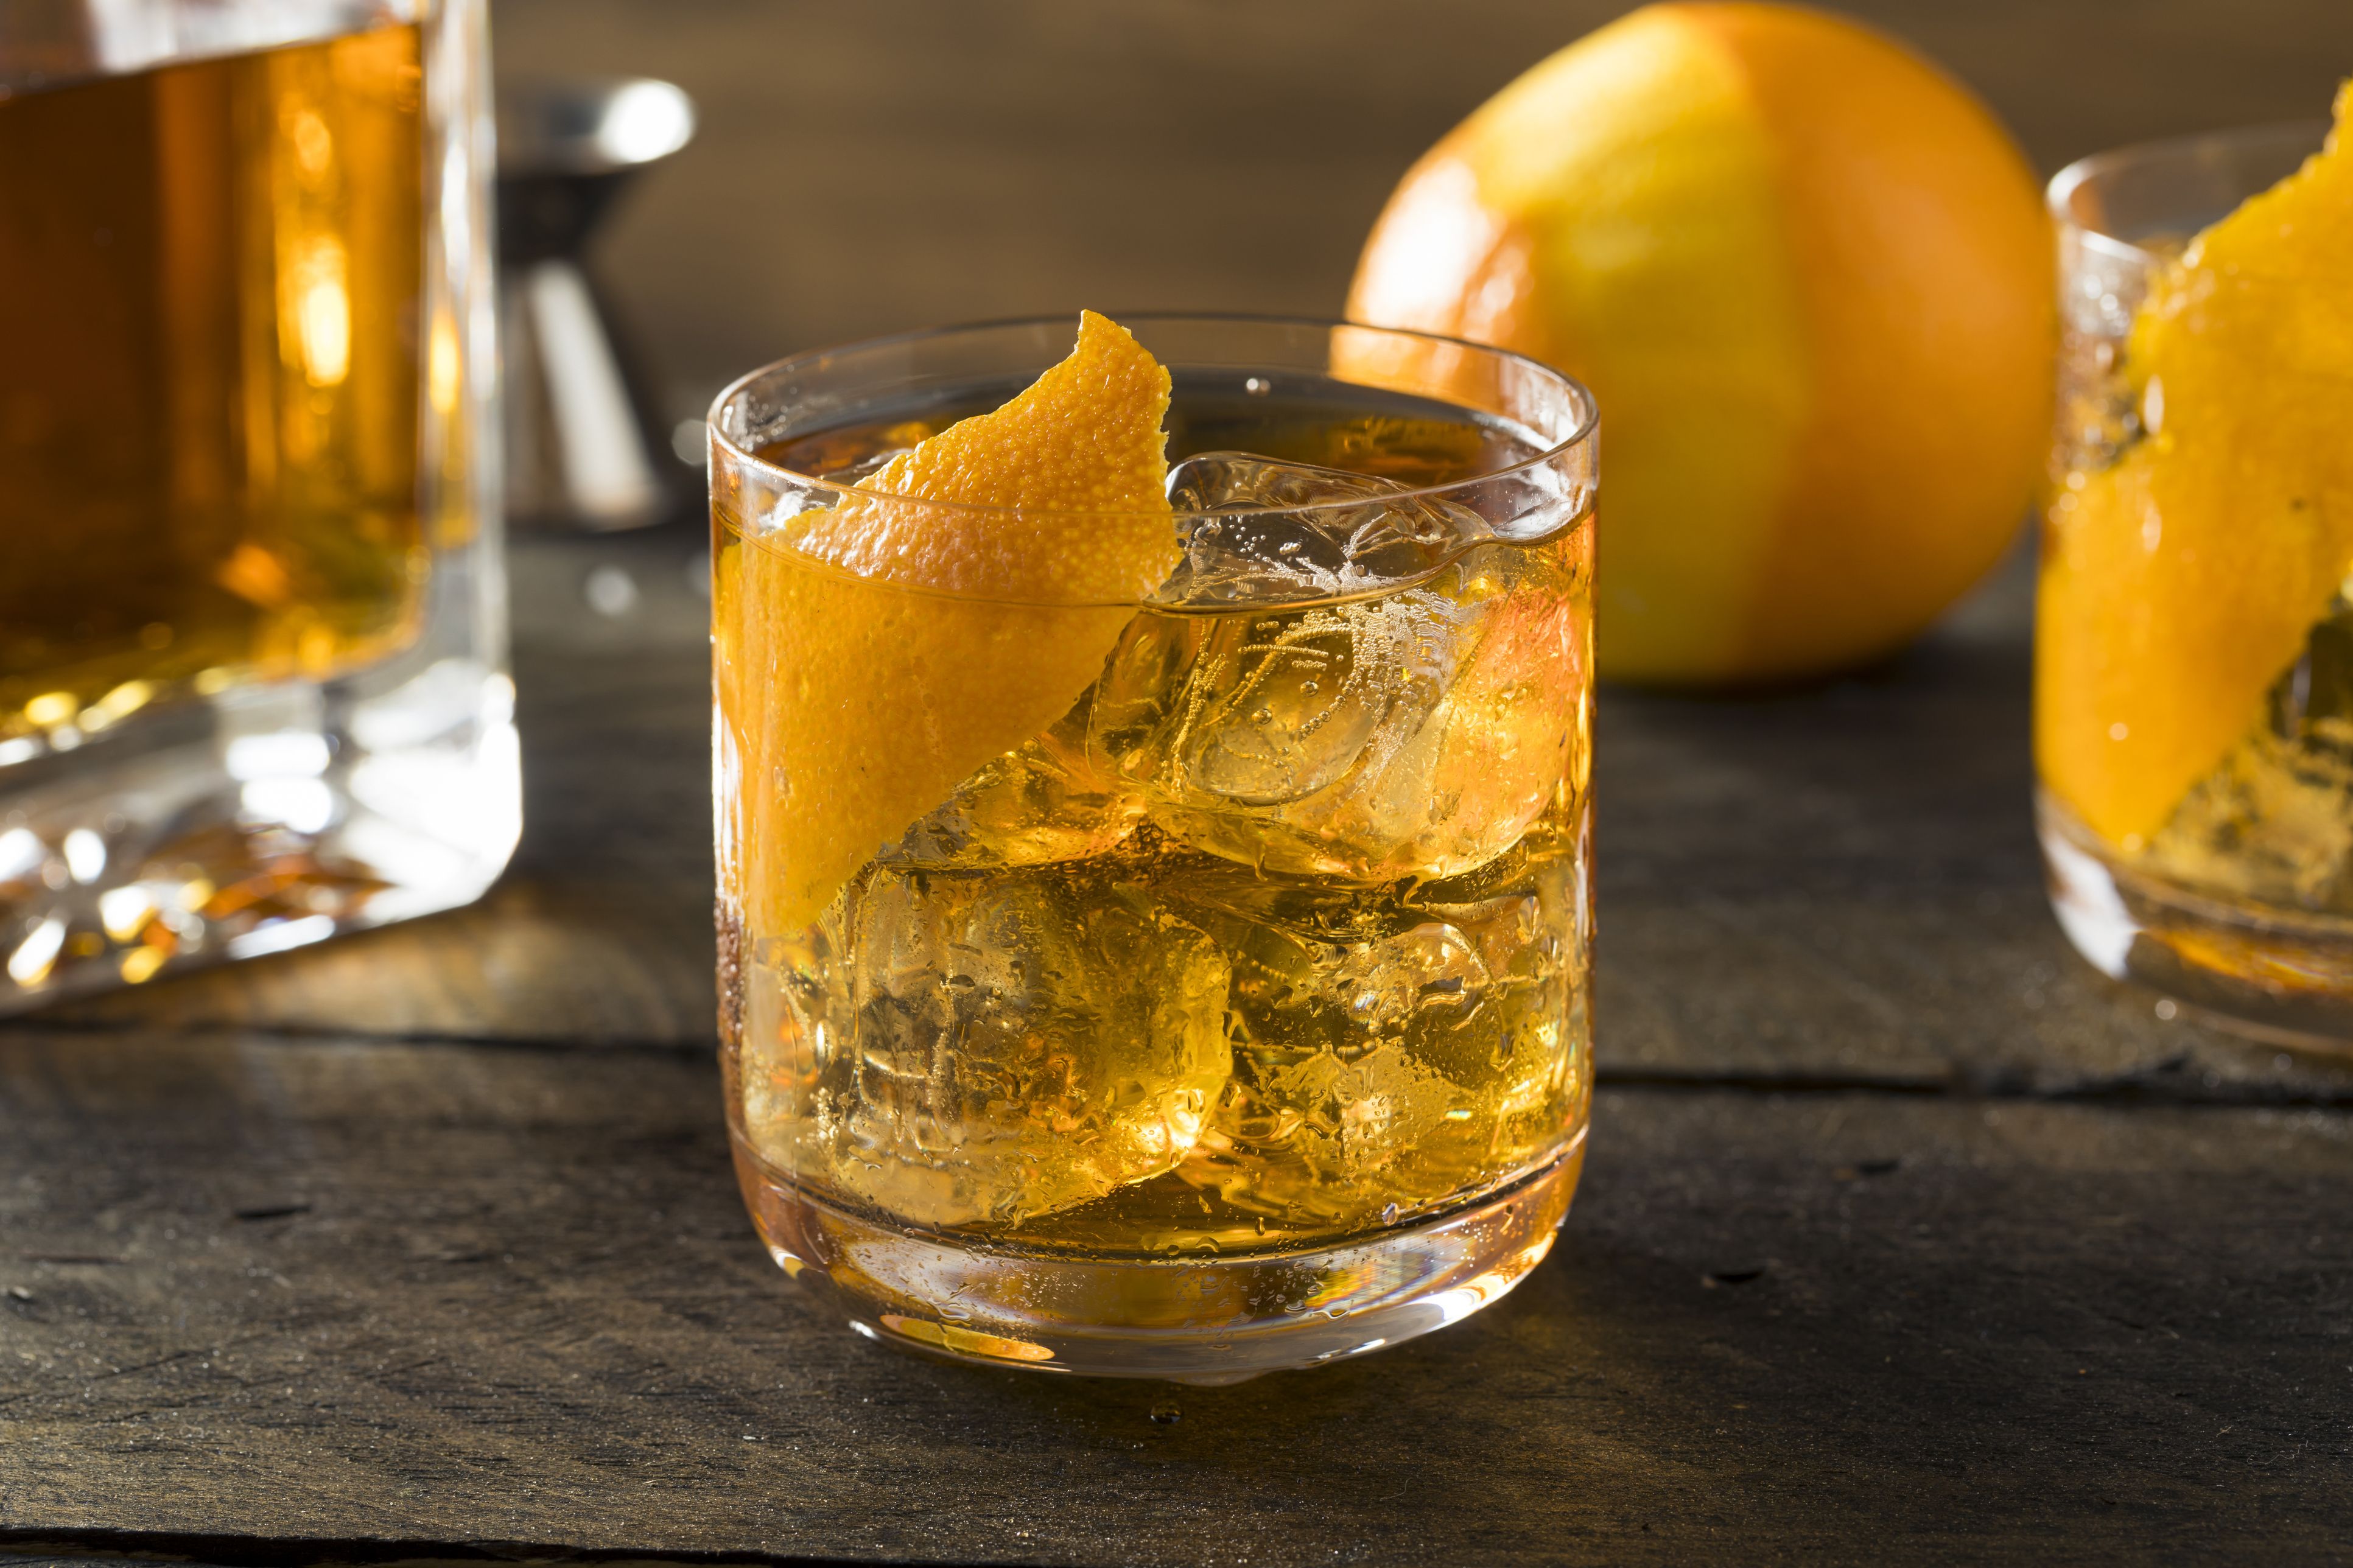 Boozy Homemade Old Fashioned Bourbon On The Rocks Royalty Free Image 661986692 1536869170 